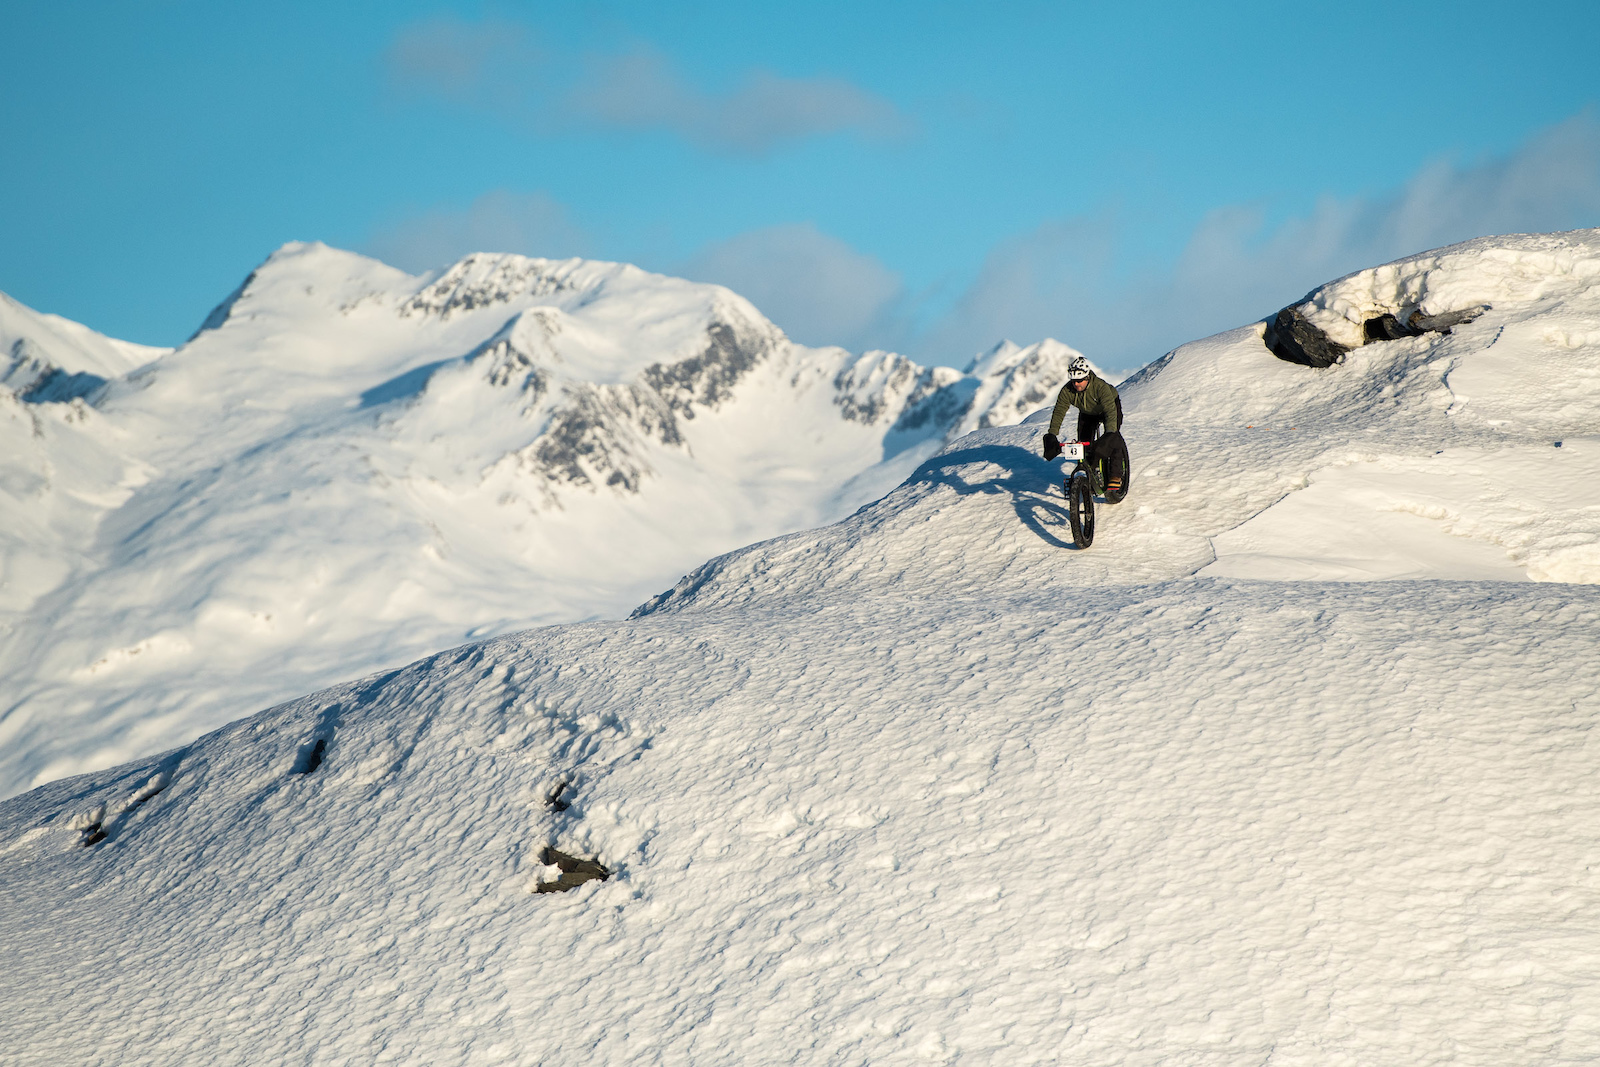 When the snow is supportive, or wind hammered, fat bike freeride opportunities are available all over and around Valdez.